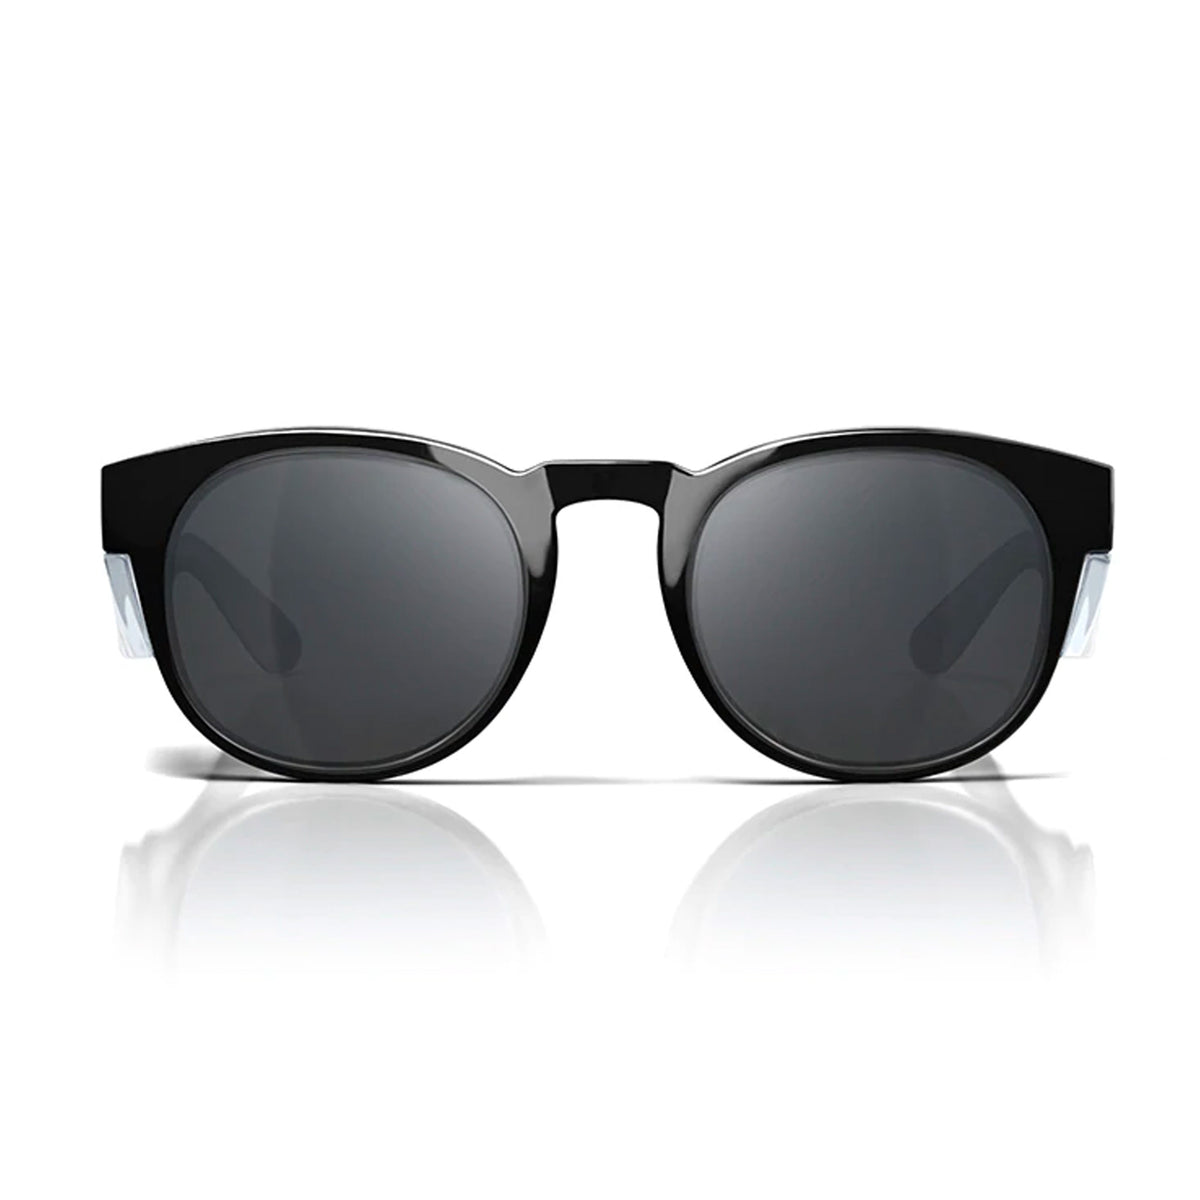 safestyle cruisers black frame with tinted uv400 lens